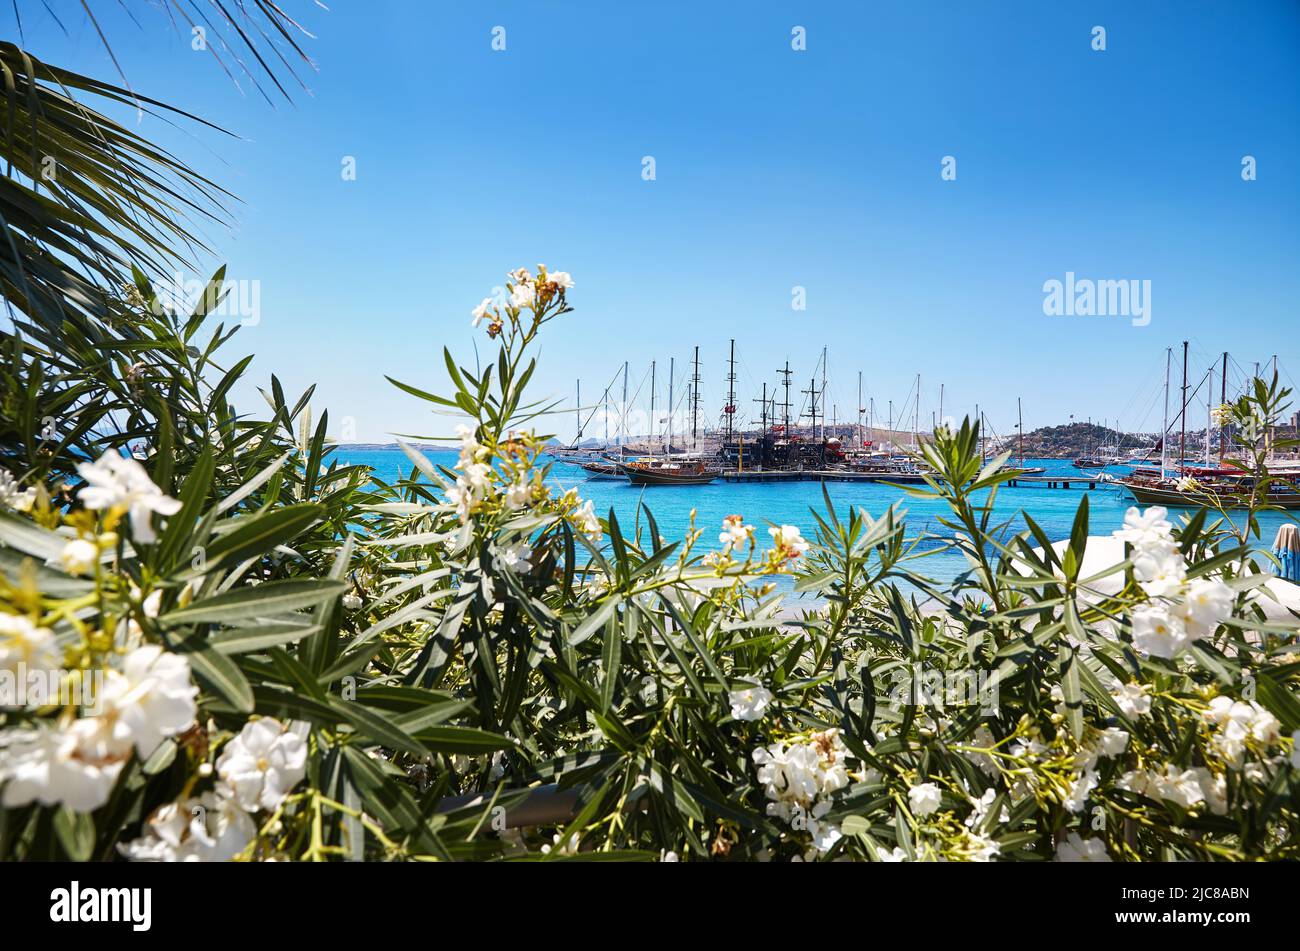 View of Bodrum Beach from Promenade. Sailing boats, yachts at Aegean sea with white flowers at foreground in Bodrum port town Turkey Stock Photo